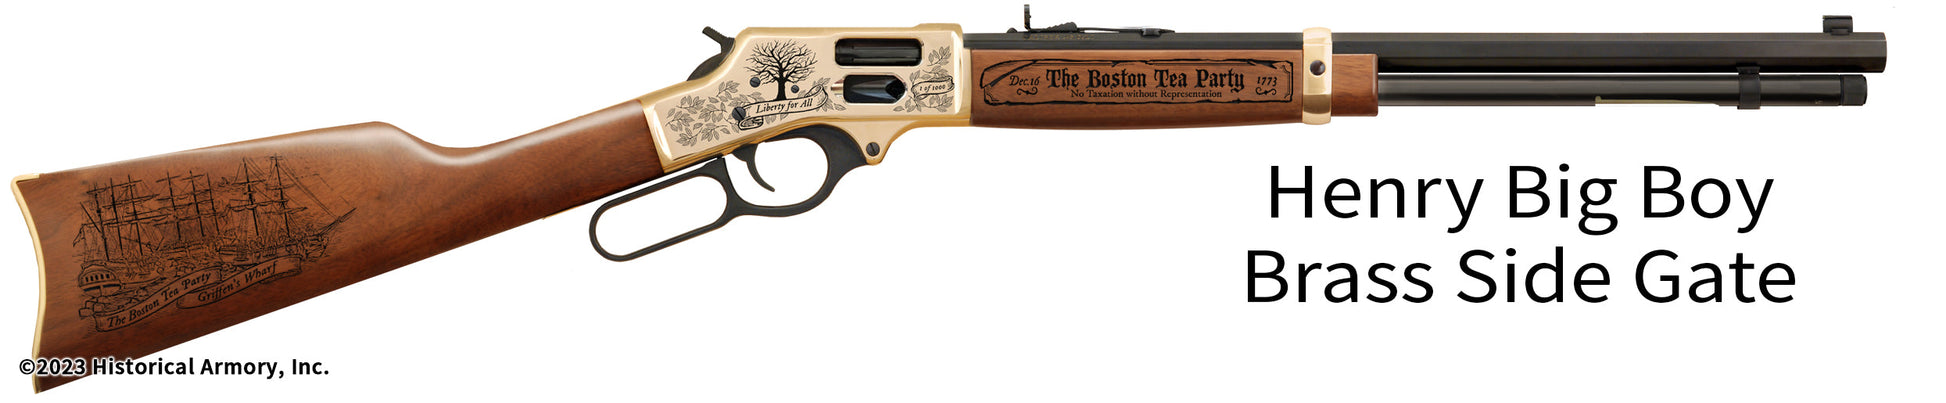 Boston Tea Party Limited Edition Henry Big Boy Brass Side Gate Engraved Rifle